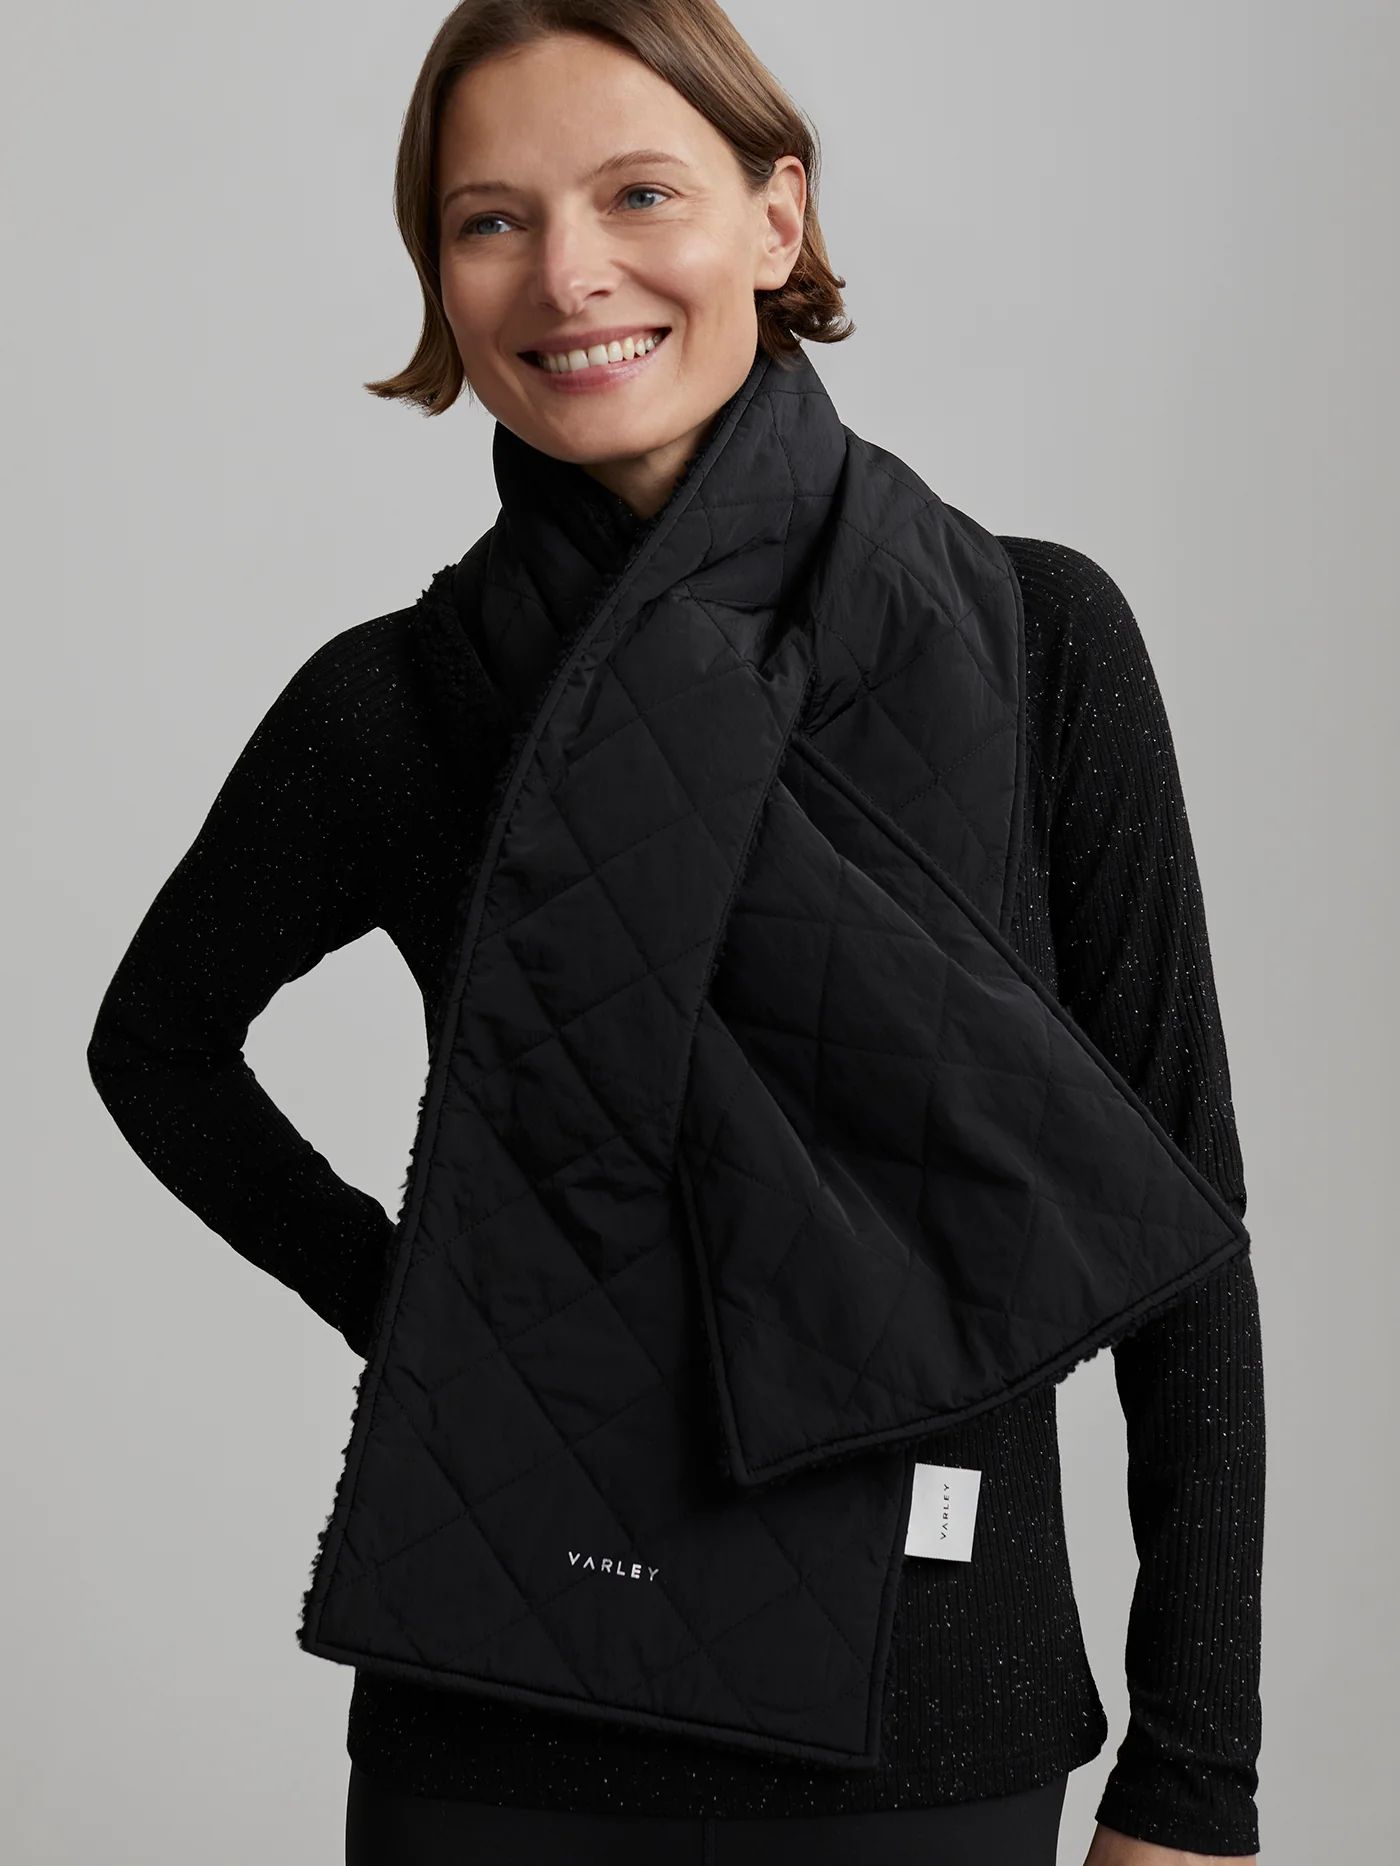 Coronet Quilt Sherpa ScarfTimeless and versatile, the Coronet scarf offers two looks in one with ... | Varley USA